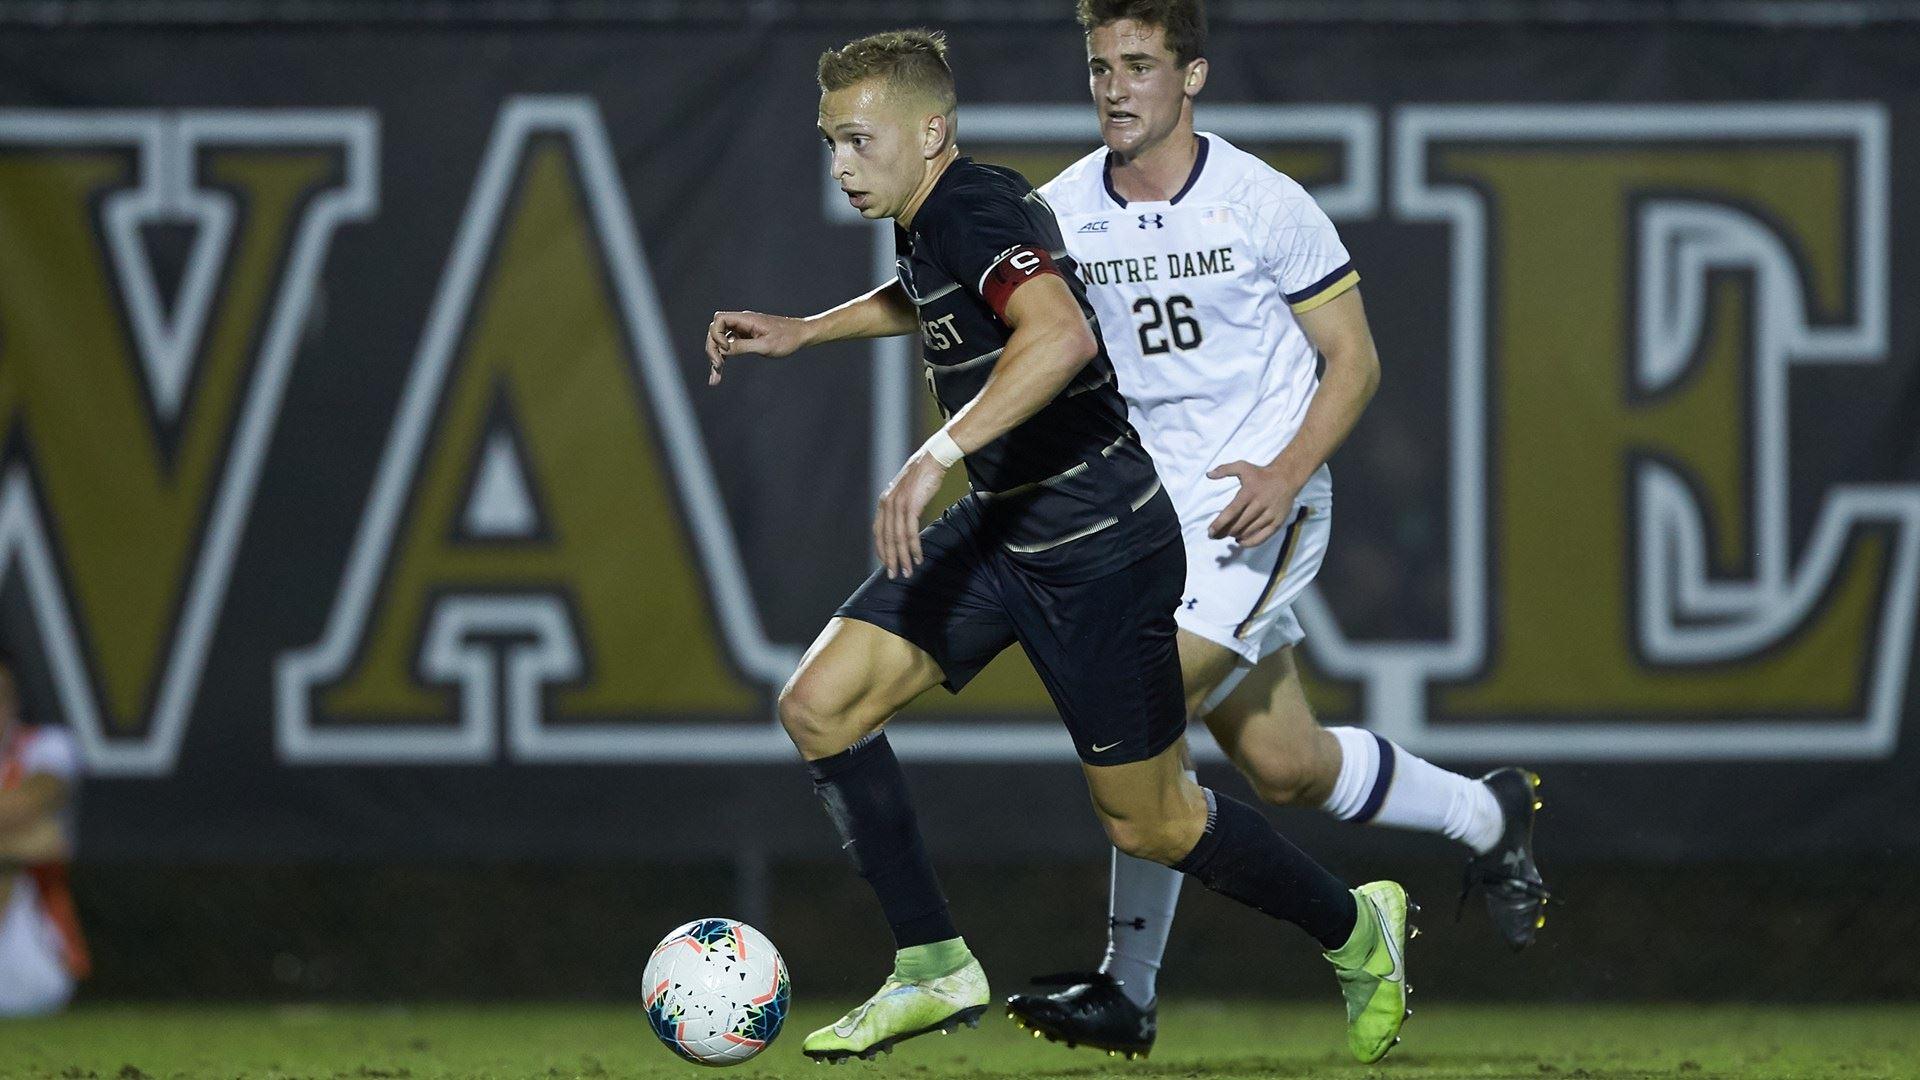 Wake Forest Falls To Notre Dame At Home 1-0